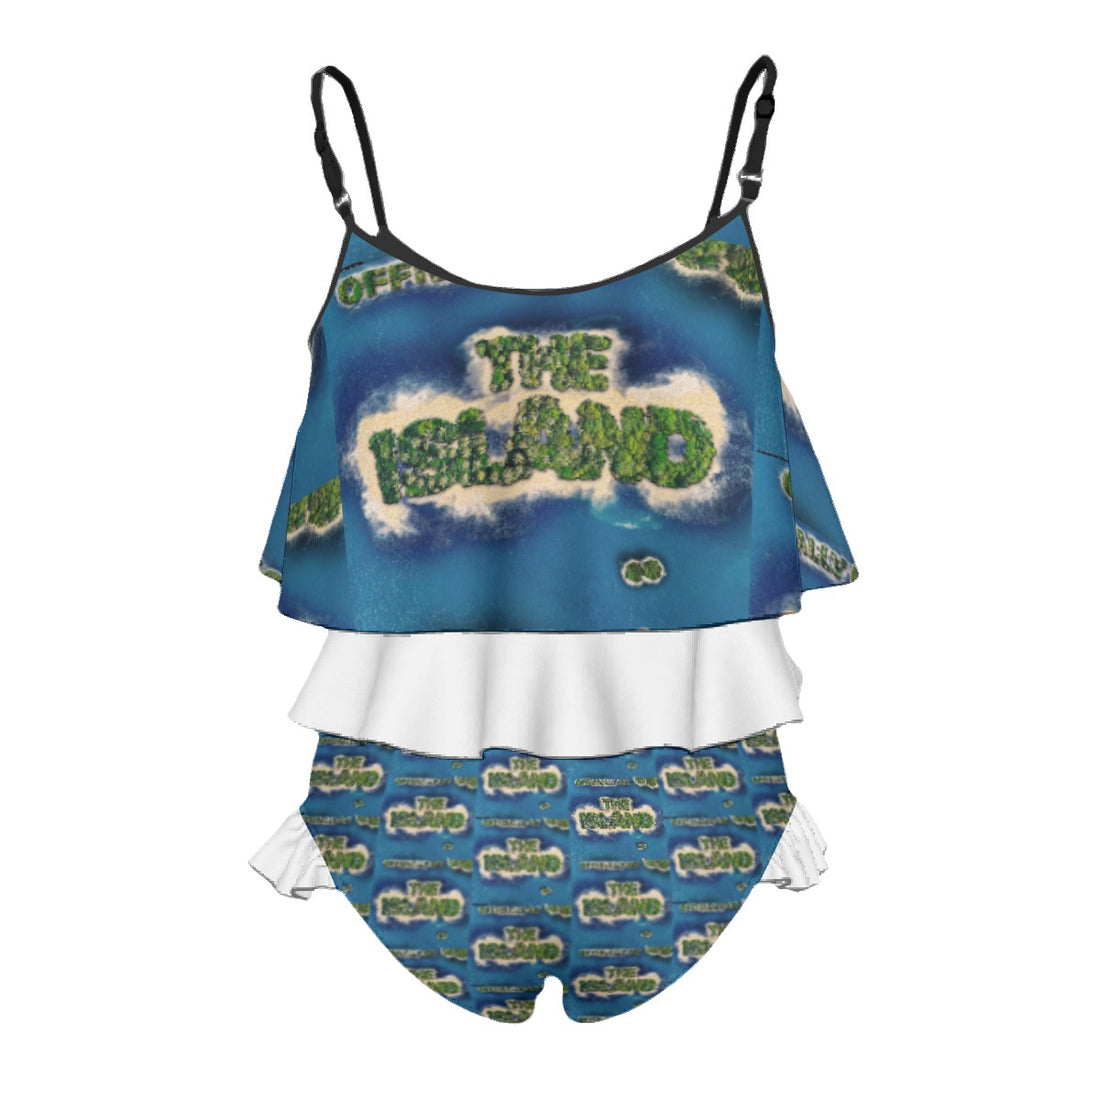 The Island kids suit